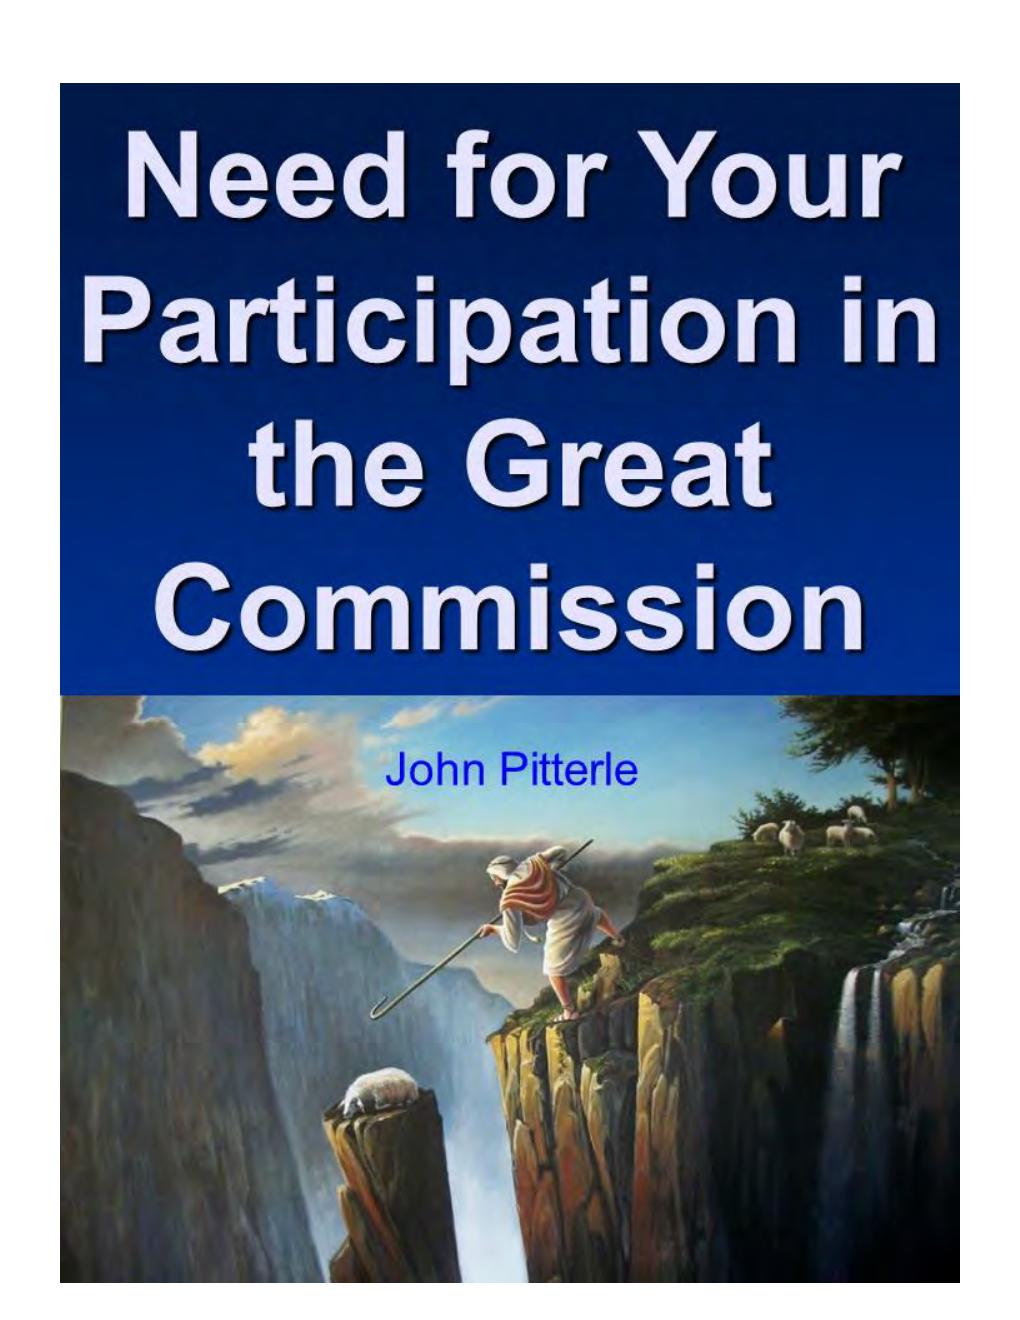 Need for Your Participation in the Great Commission Prioritizing the Unreached Copyright © 2016 by John Pitterle